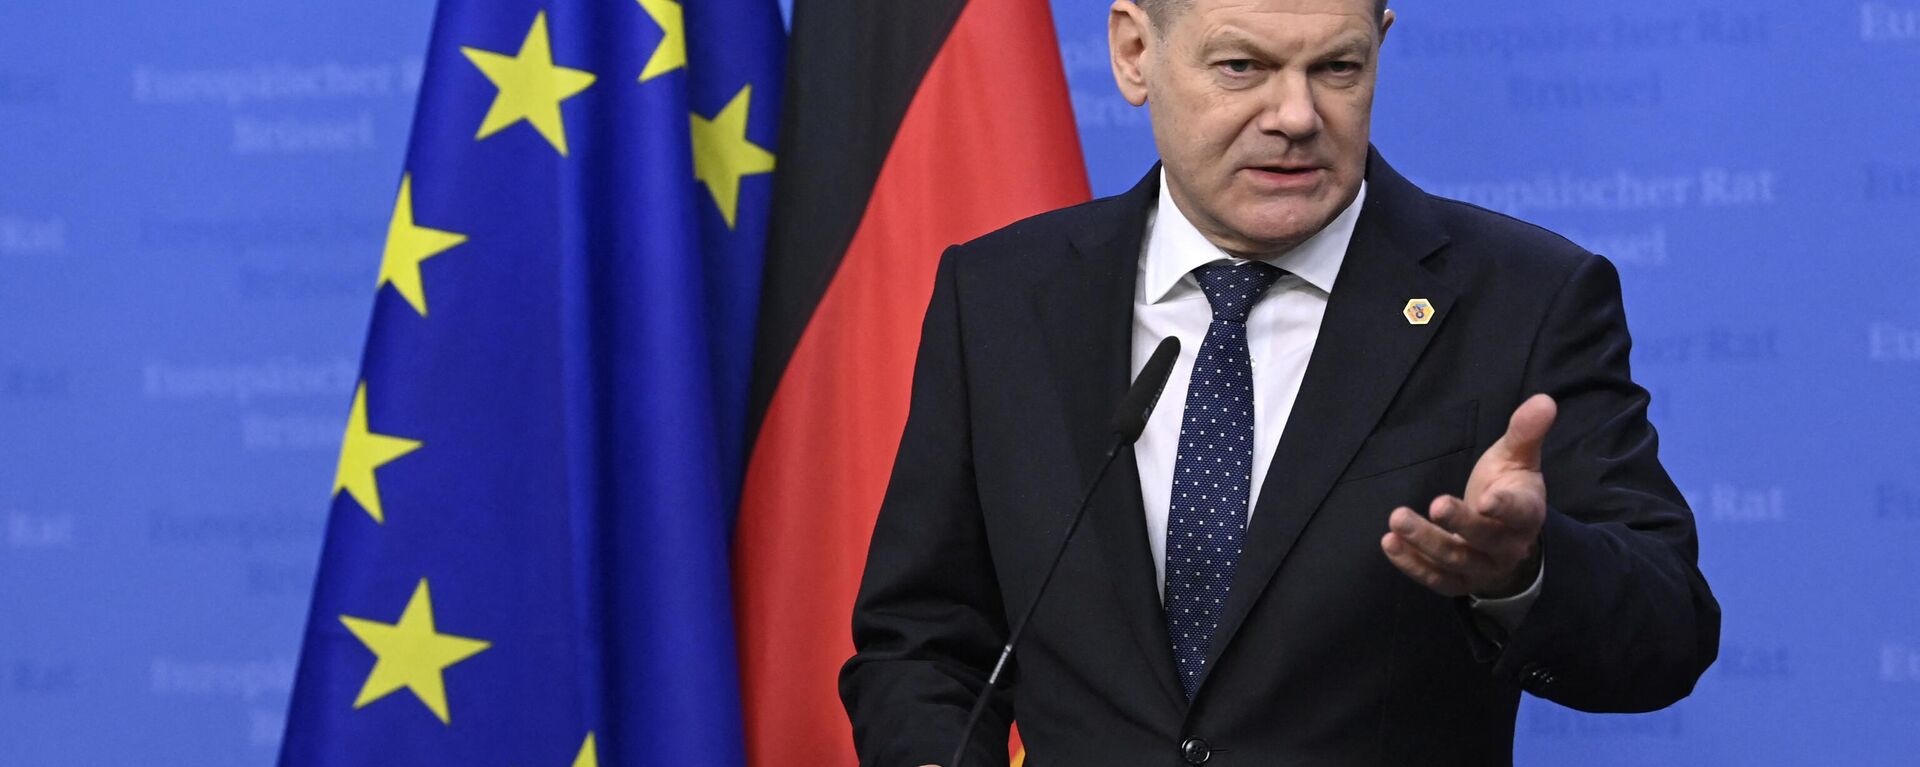 German Chancellor Olaf Scholz delivers a press conference during the EU-ASEAN (Association of Southeast Asian Nations) summit at the European Council headquarters in Brussels on December 14, 2022 - Sputnik International, 1920, 03.01.2023